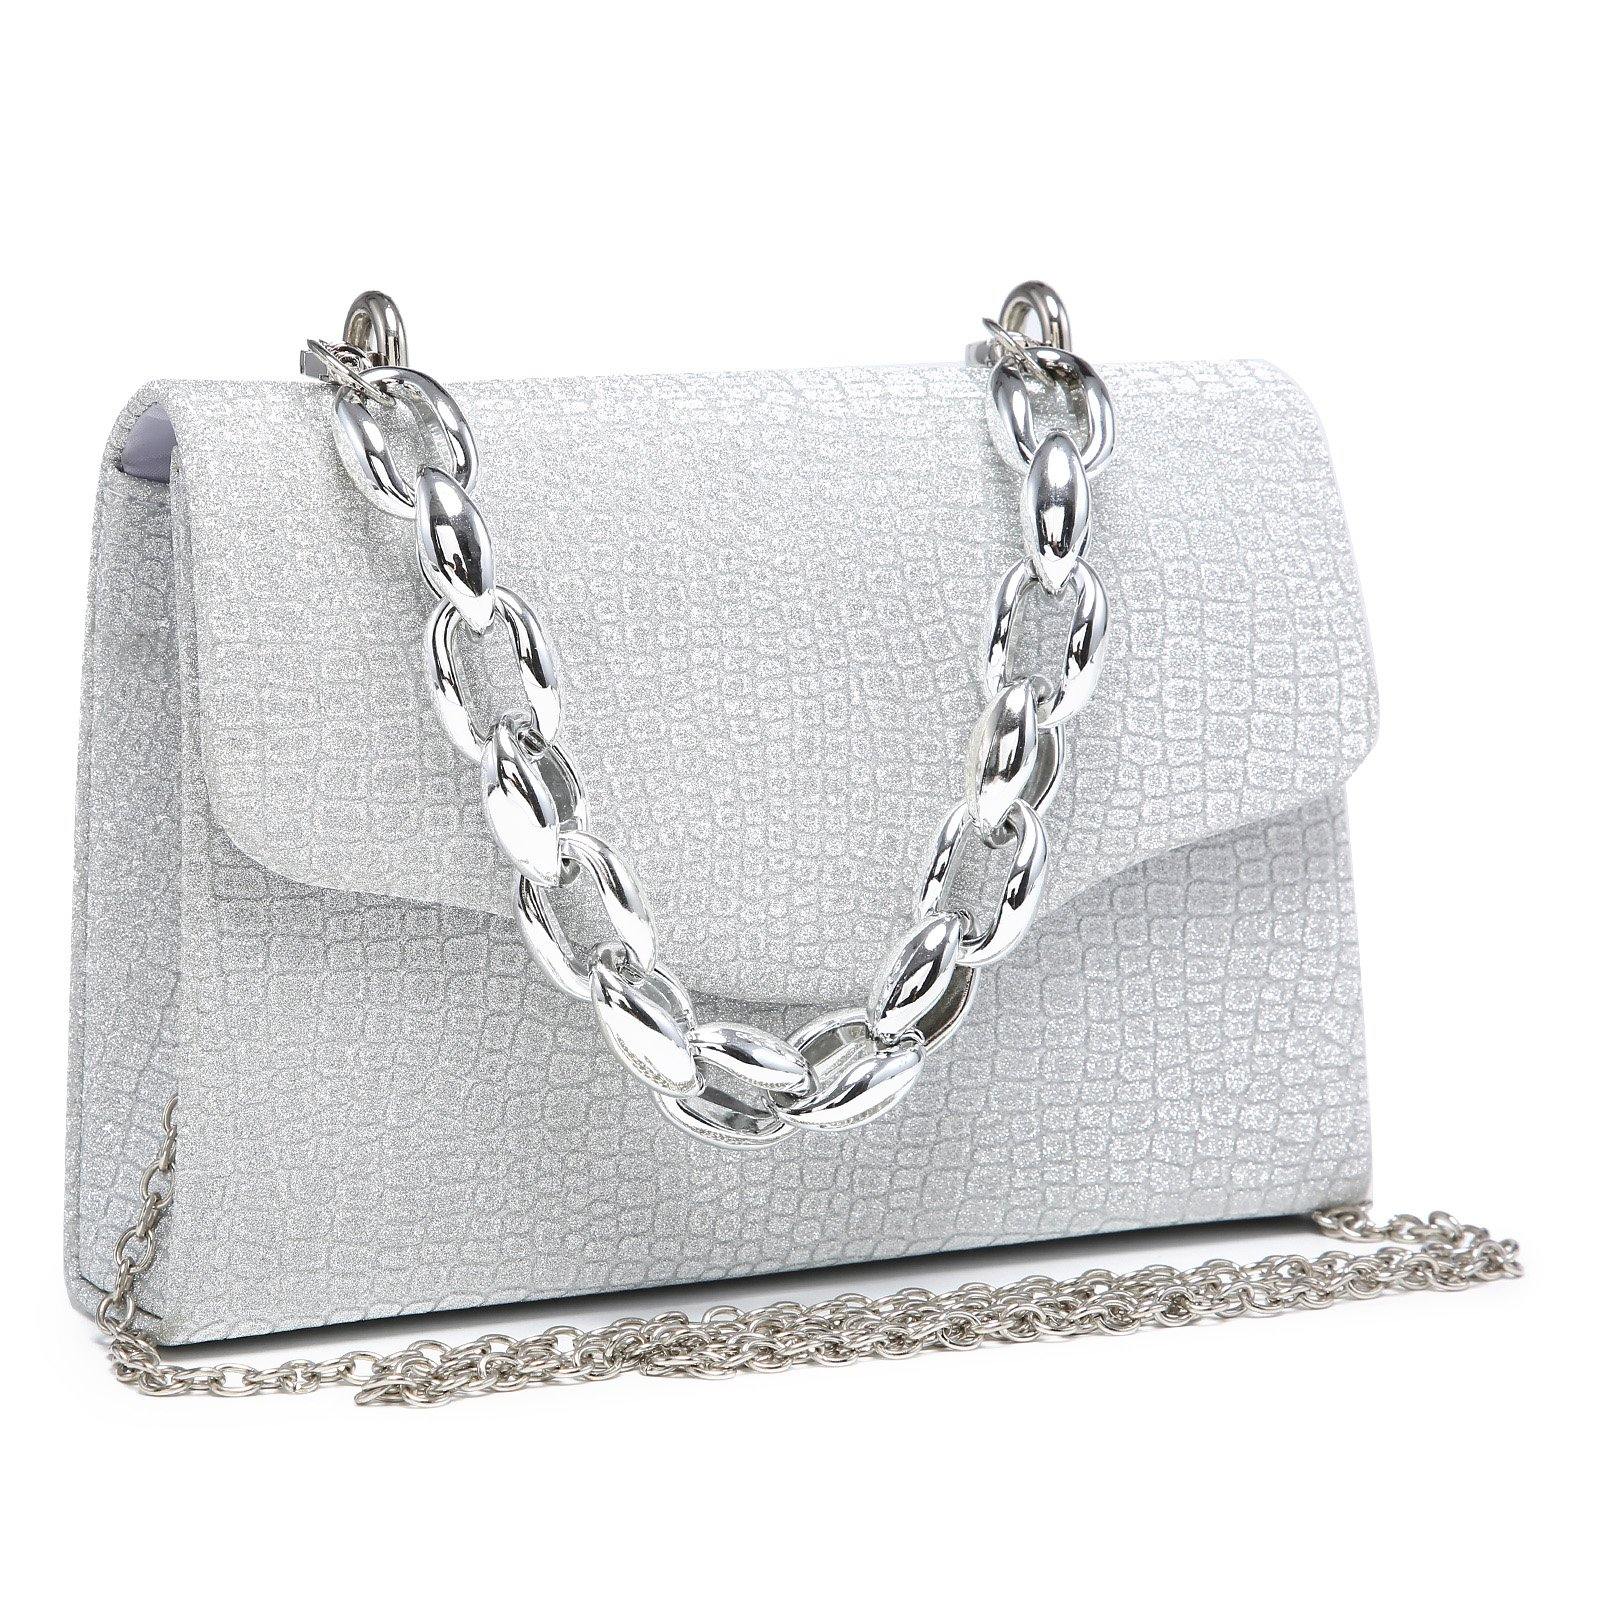 Gelory Women's Party Prom Handbags Top Handle Clutch Bags Ladies Evening  Purse Crossbody Bag Wedding Chain Shoulder Bag (Silver) - ShopStyle